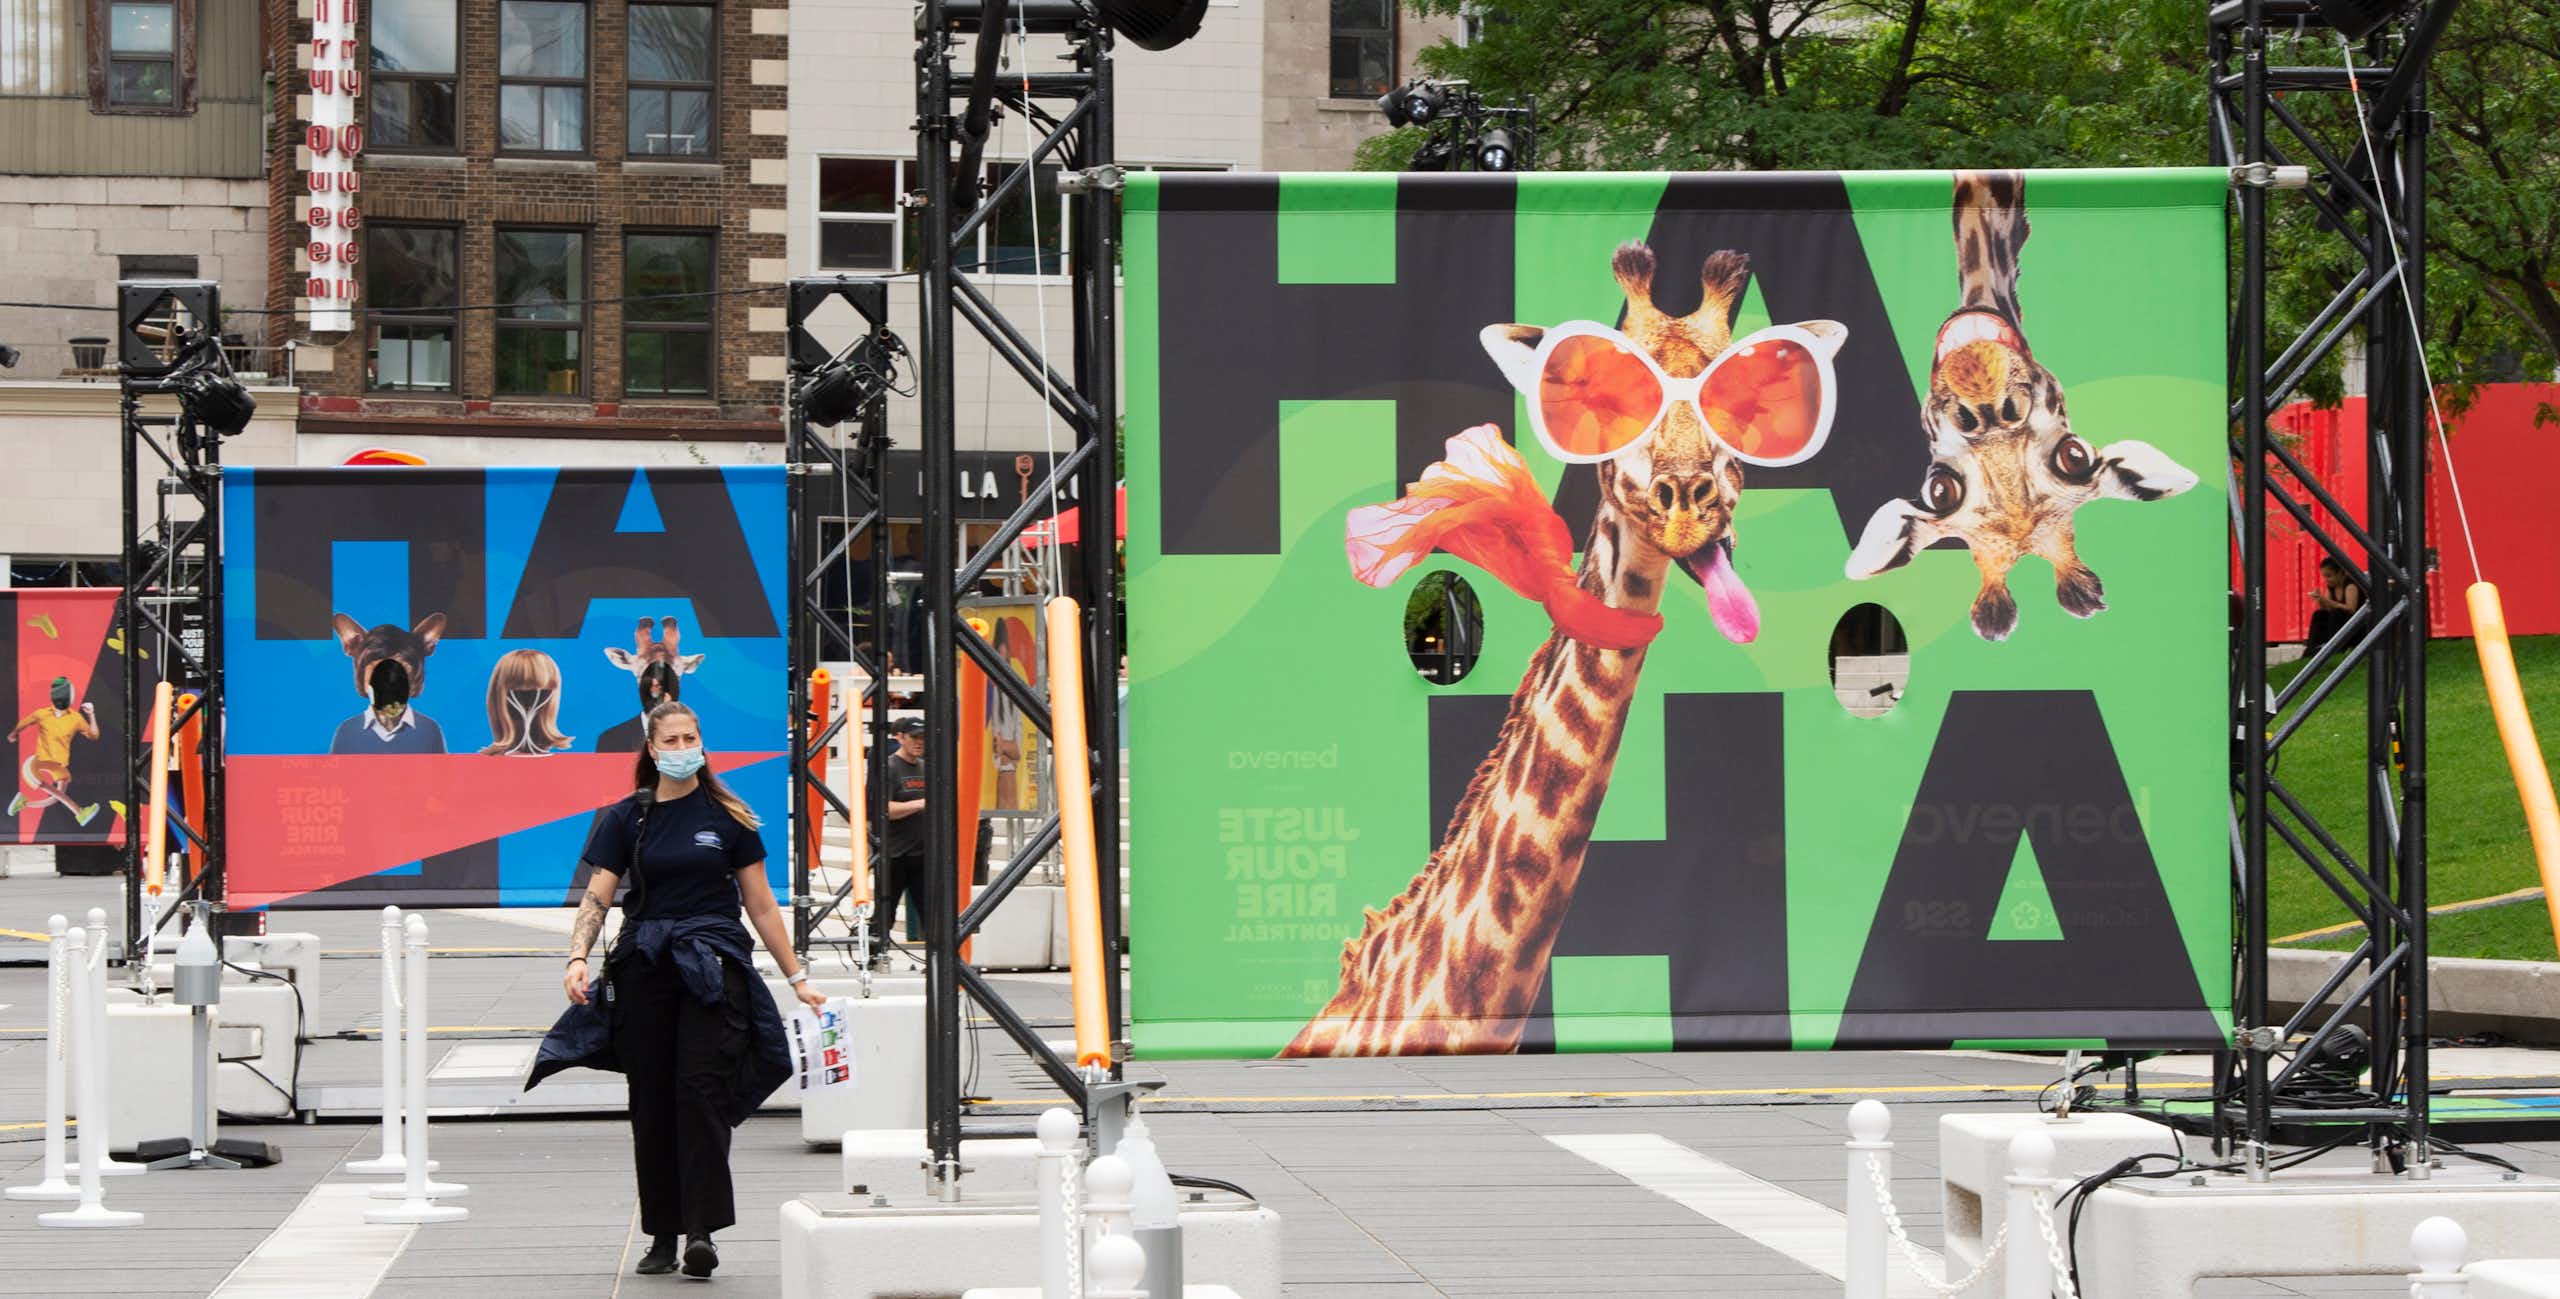 A sign with a giraffe in funny glasses sticking tongue out says 'ha ha' and a person walks past.